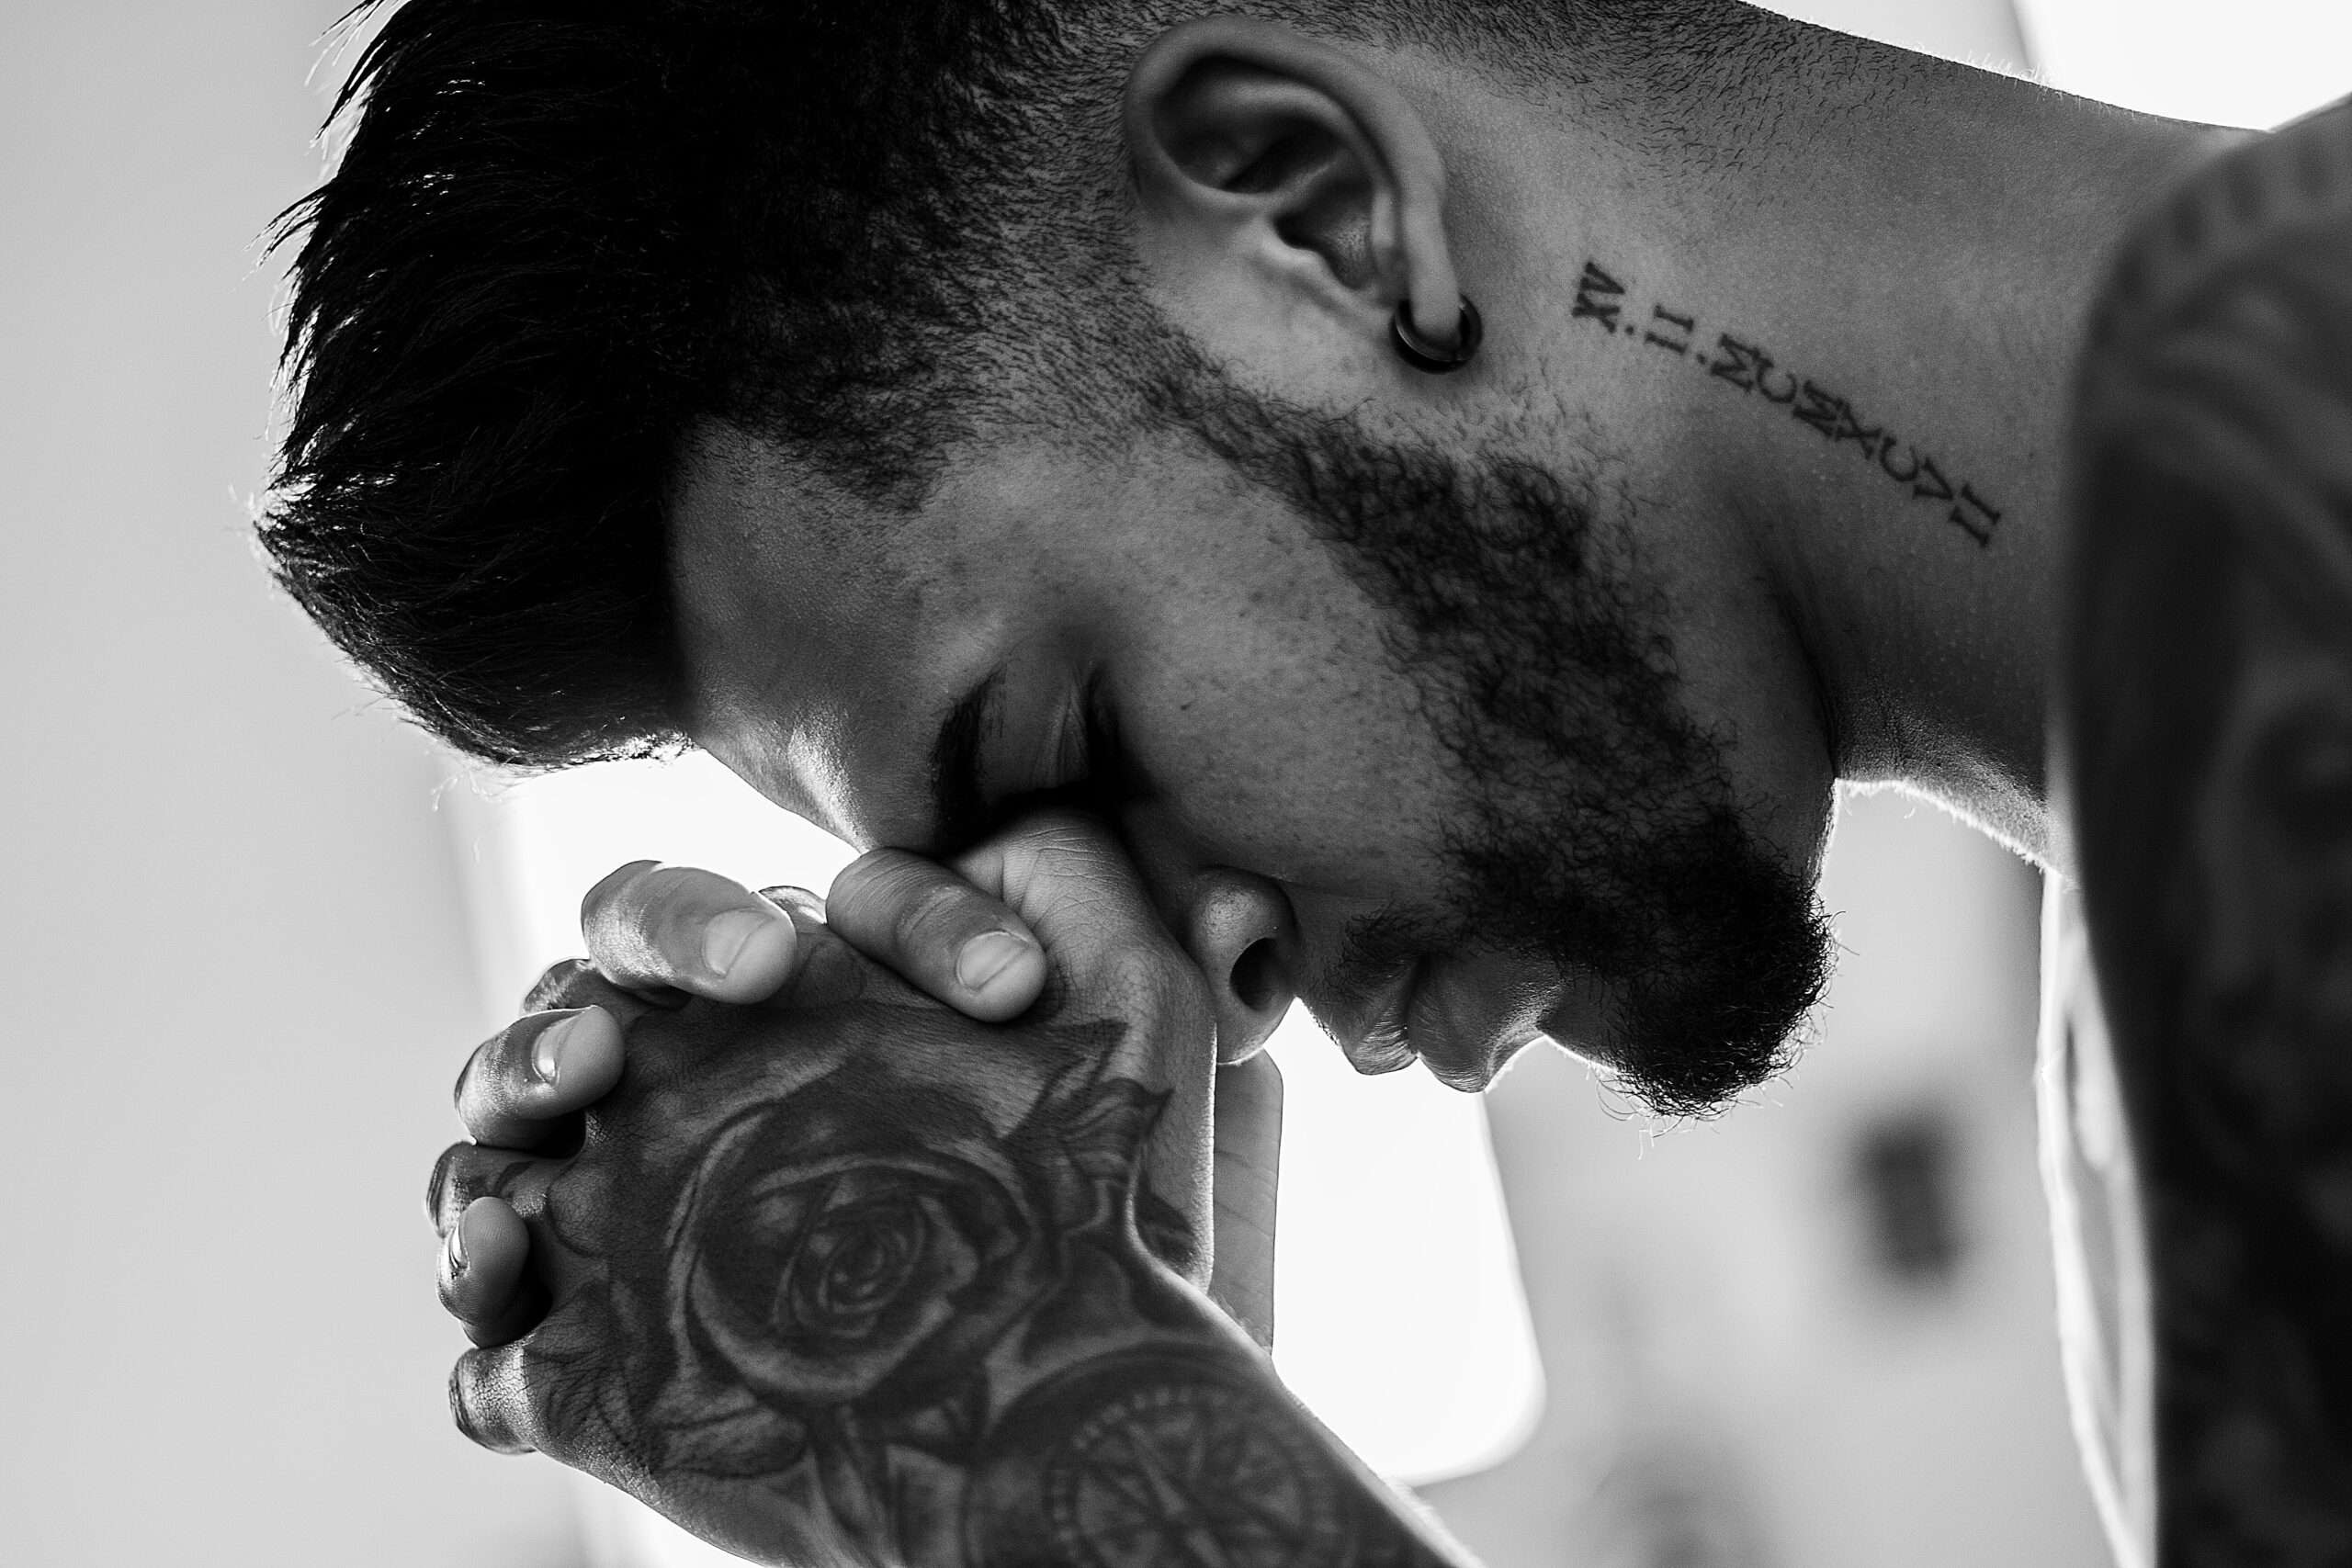 man with tattoos and black hair and beard praying with head resting on hands in a fist